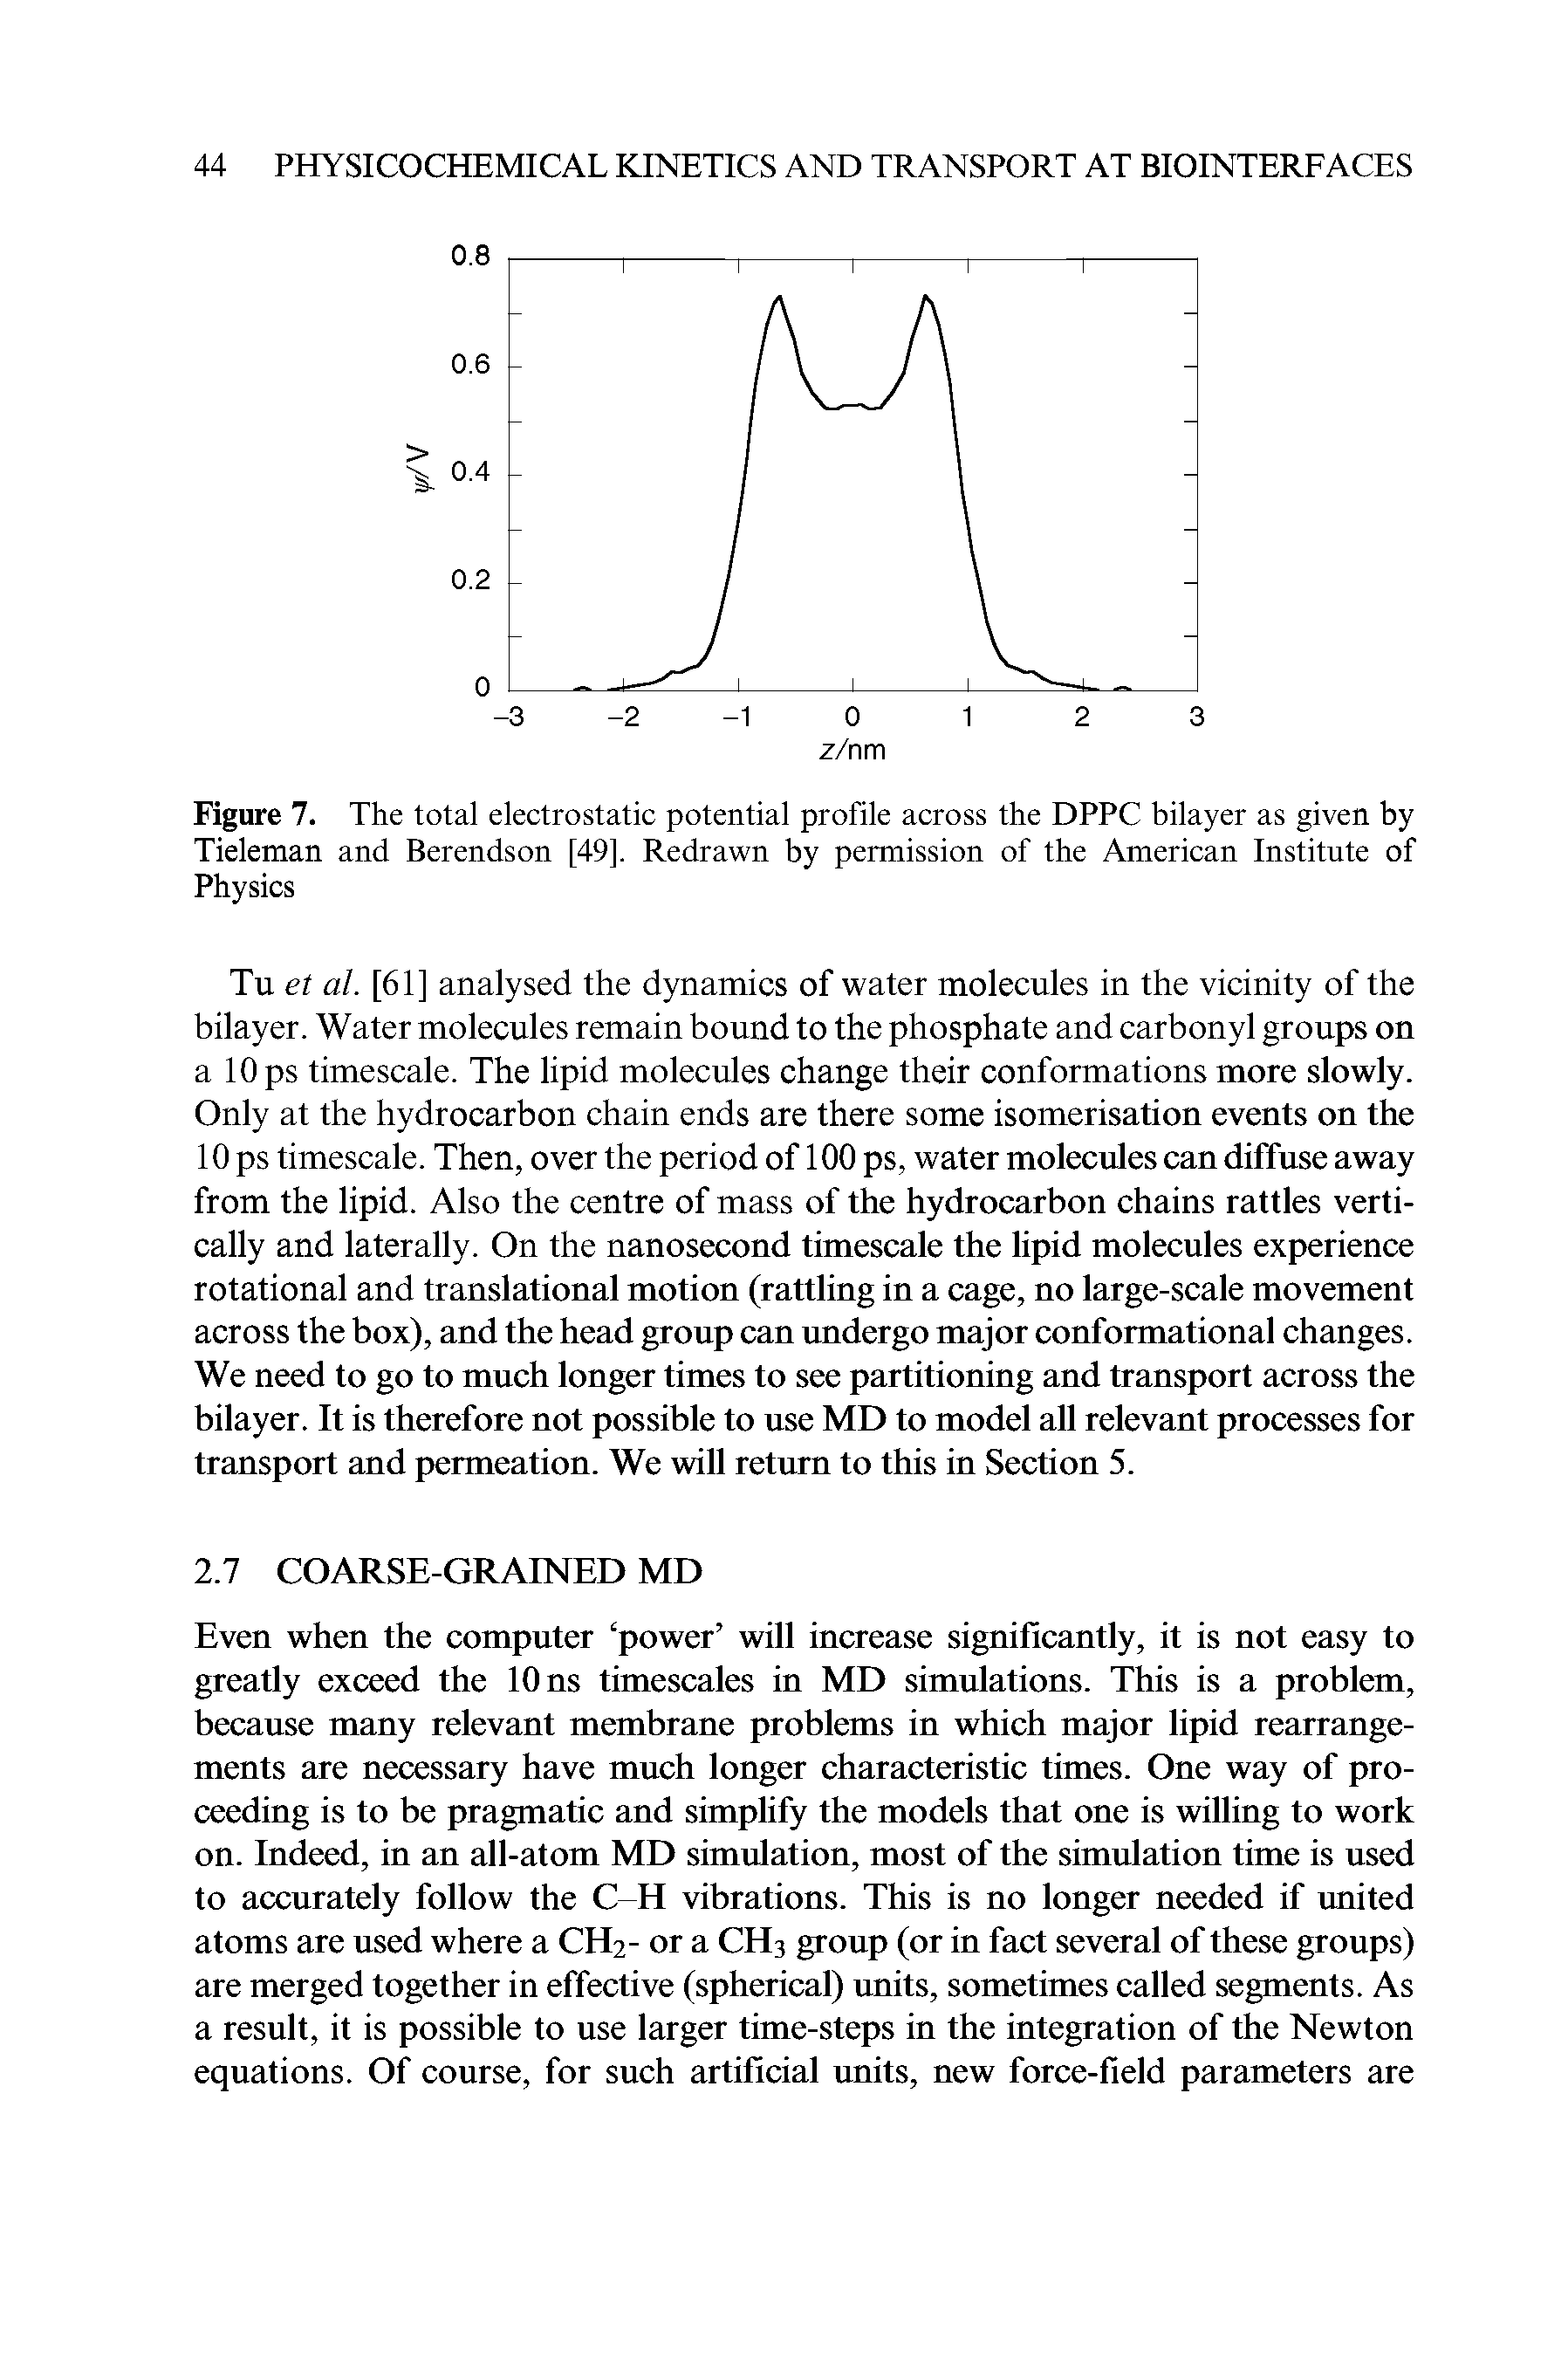 Figure 7. The total electrostatic potential profile across the DPPC bilayer as given by Tieleman and Berendson [49], Redrawn by permission of the American Institute of Physics...